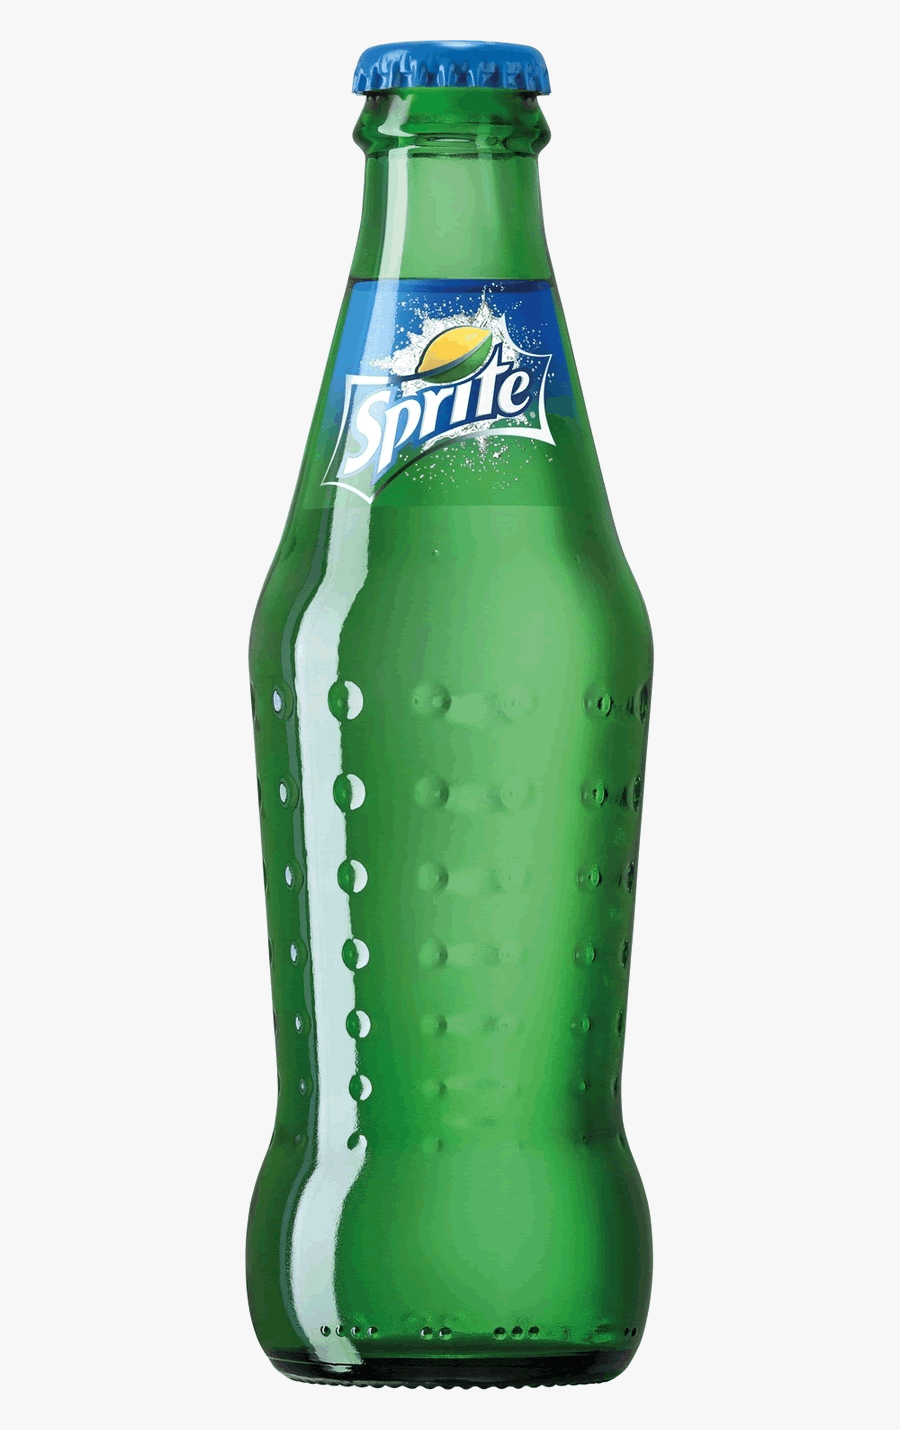 Sprite Png Bottle Image - Png Image Of Sprite, free clipart download, png, clipart...